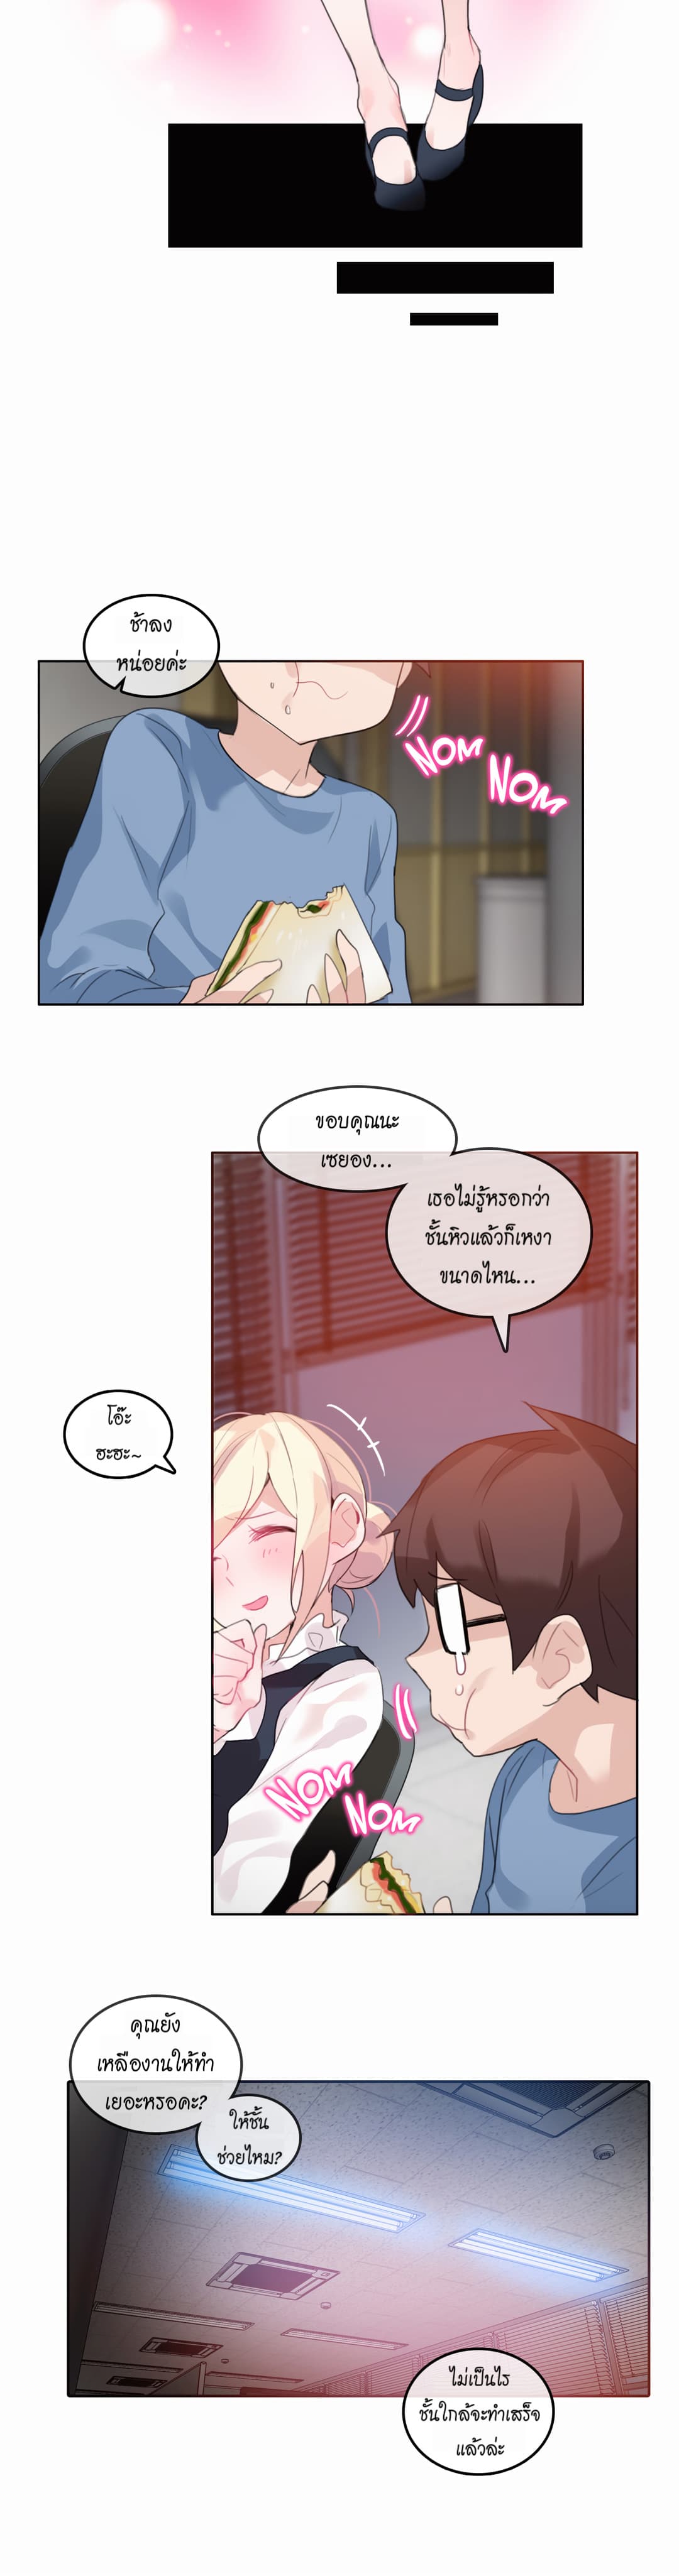 A Pervert’s Daily Life 23 (12)